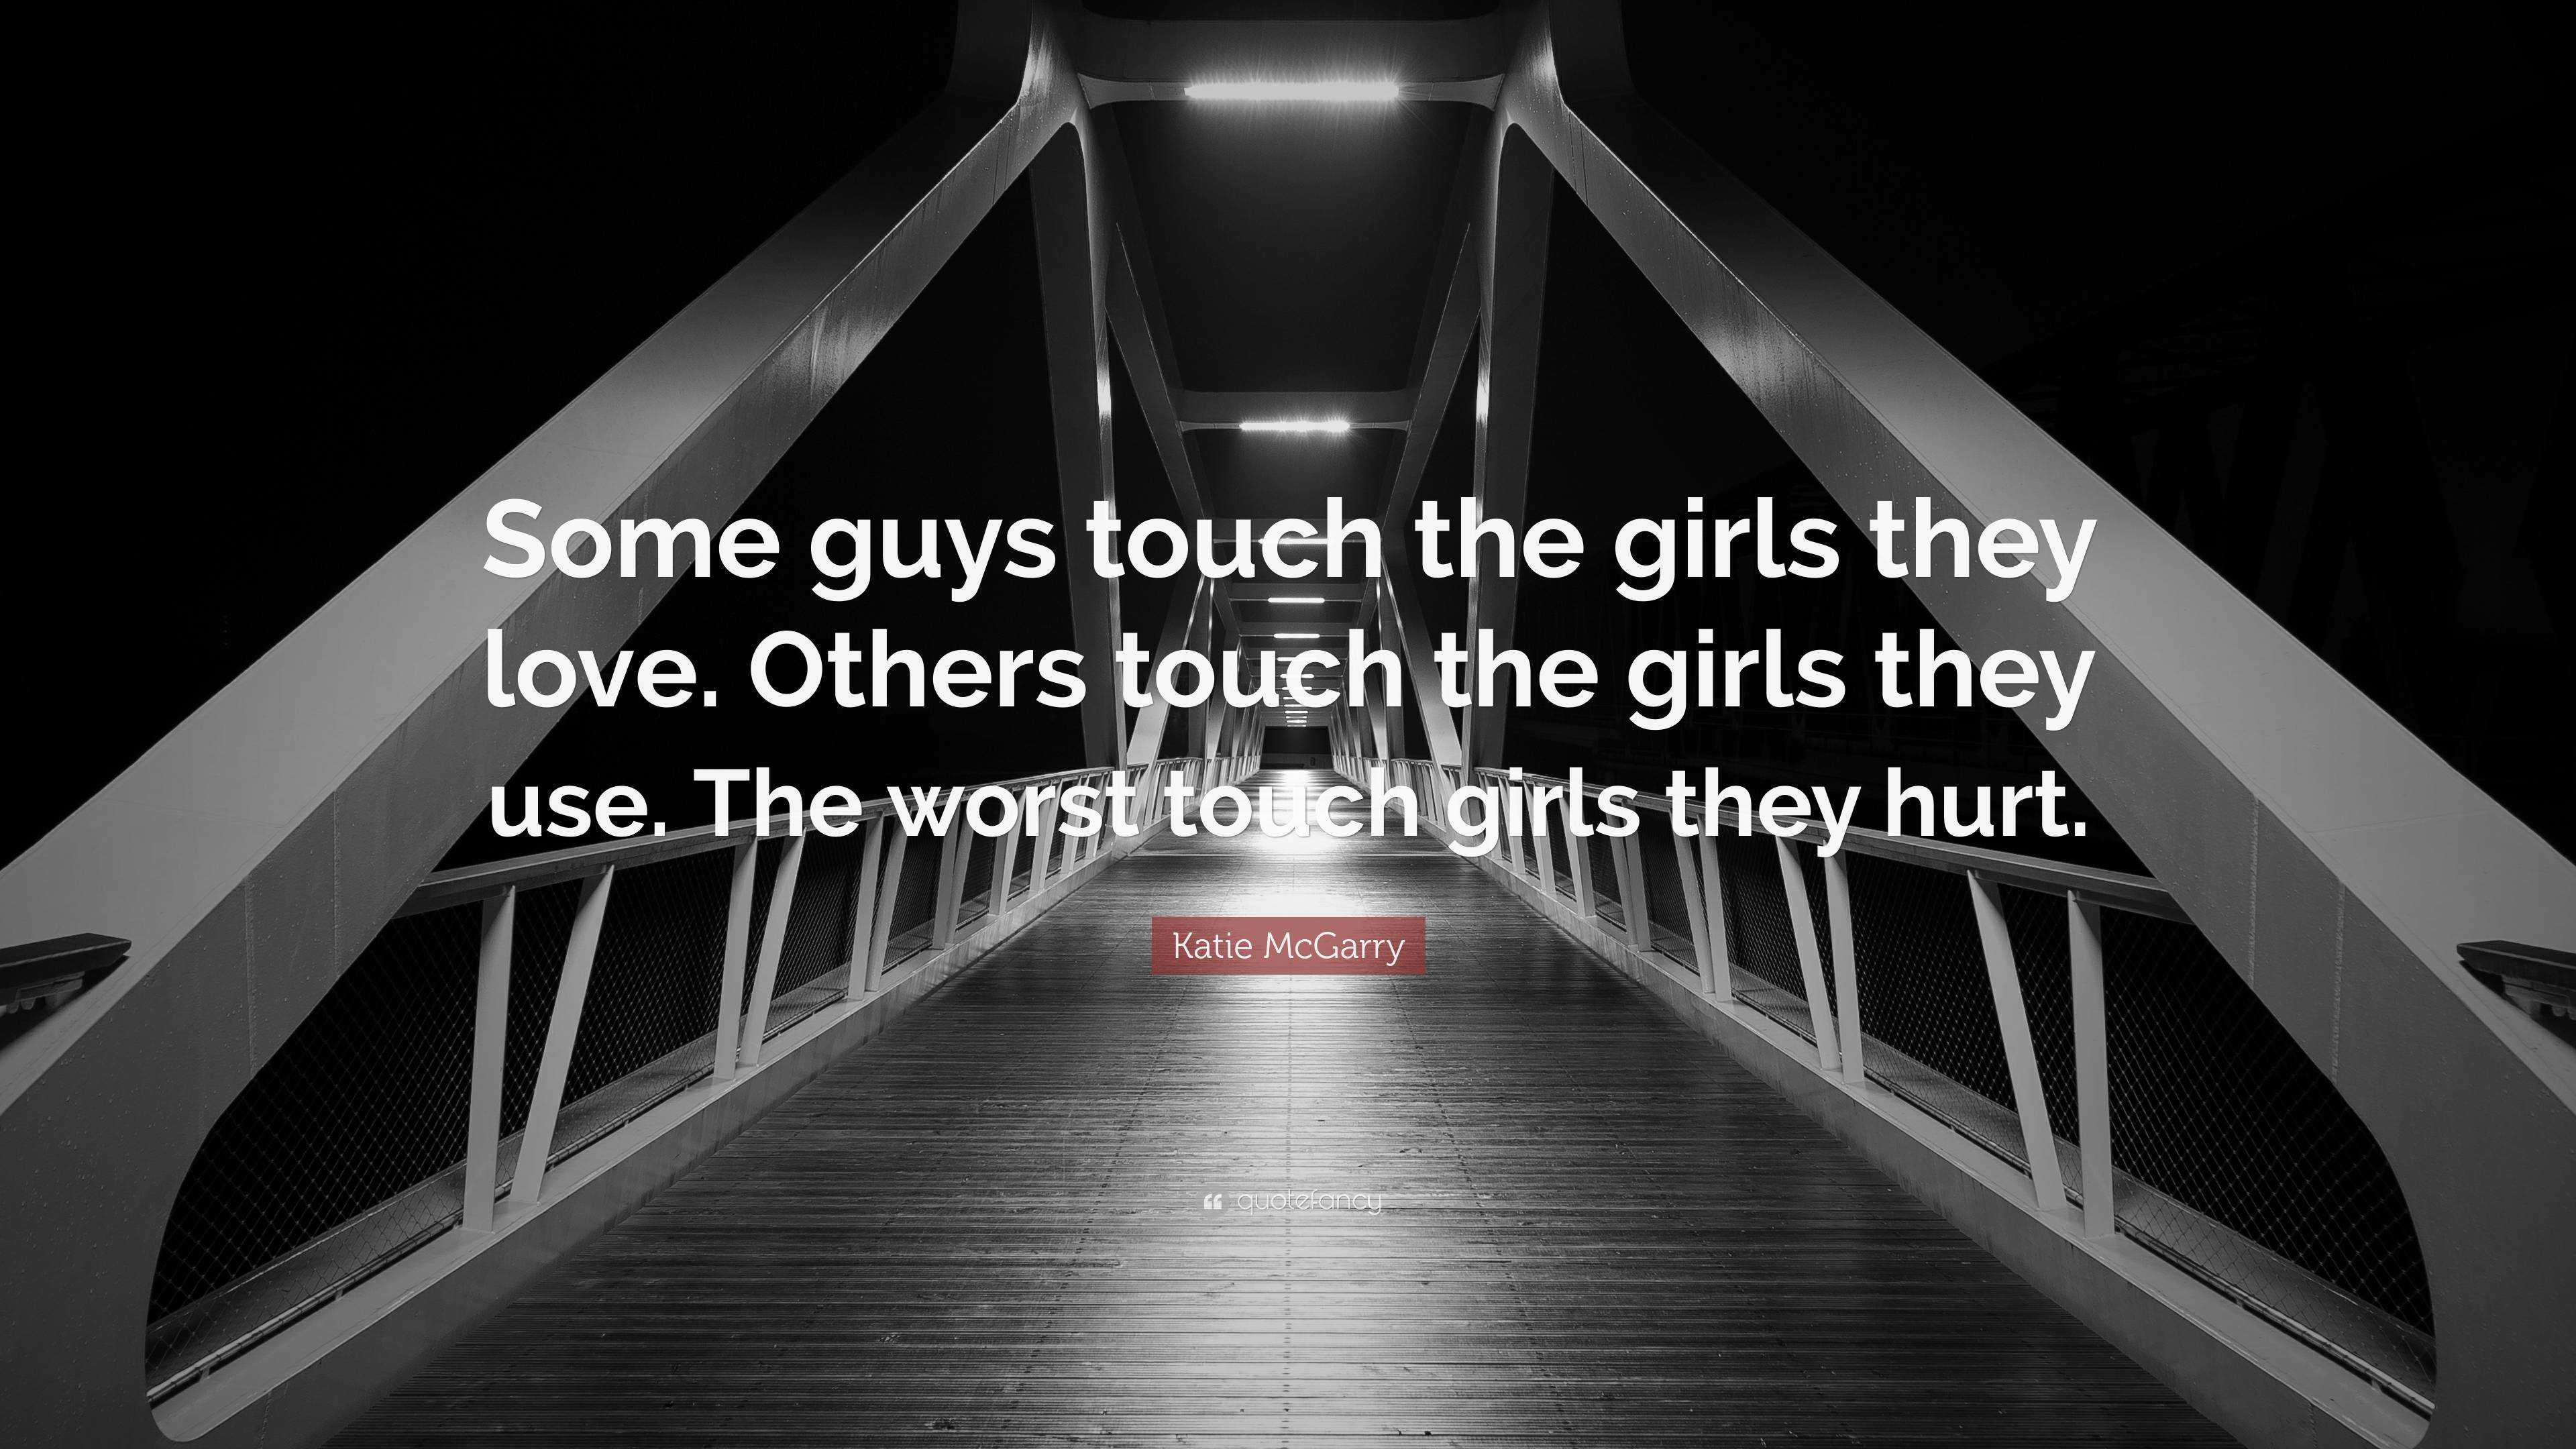 Why do guys touch girls